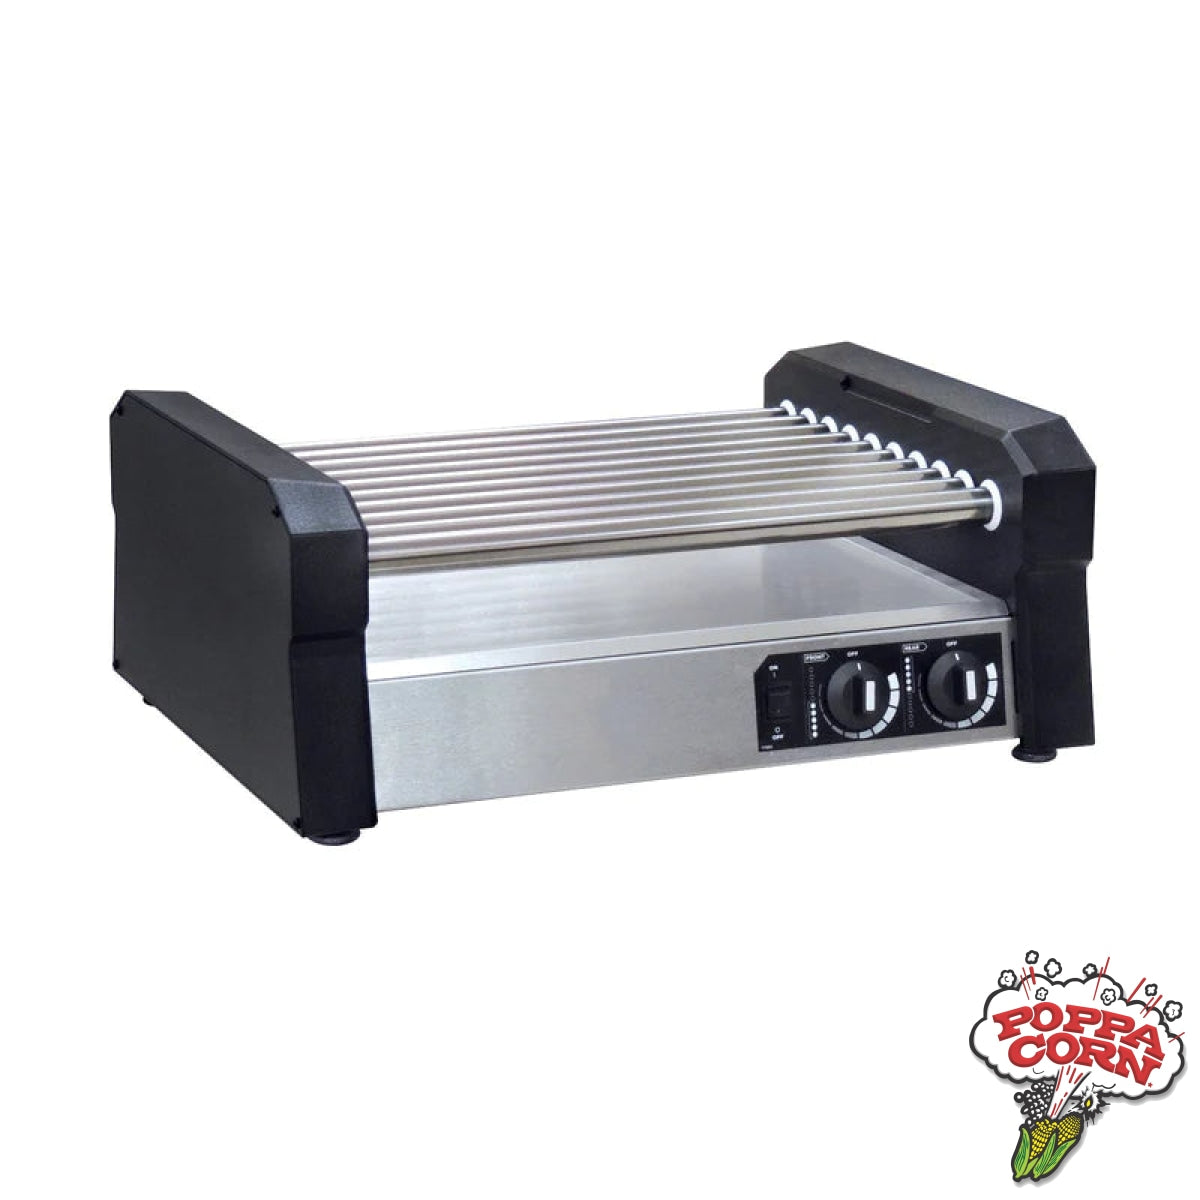 Hot Diggity Pro S Roller Grill - Stainless Steel Rollers - GM8551-00-000 - Poppa Corn Corp